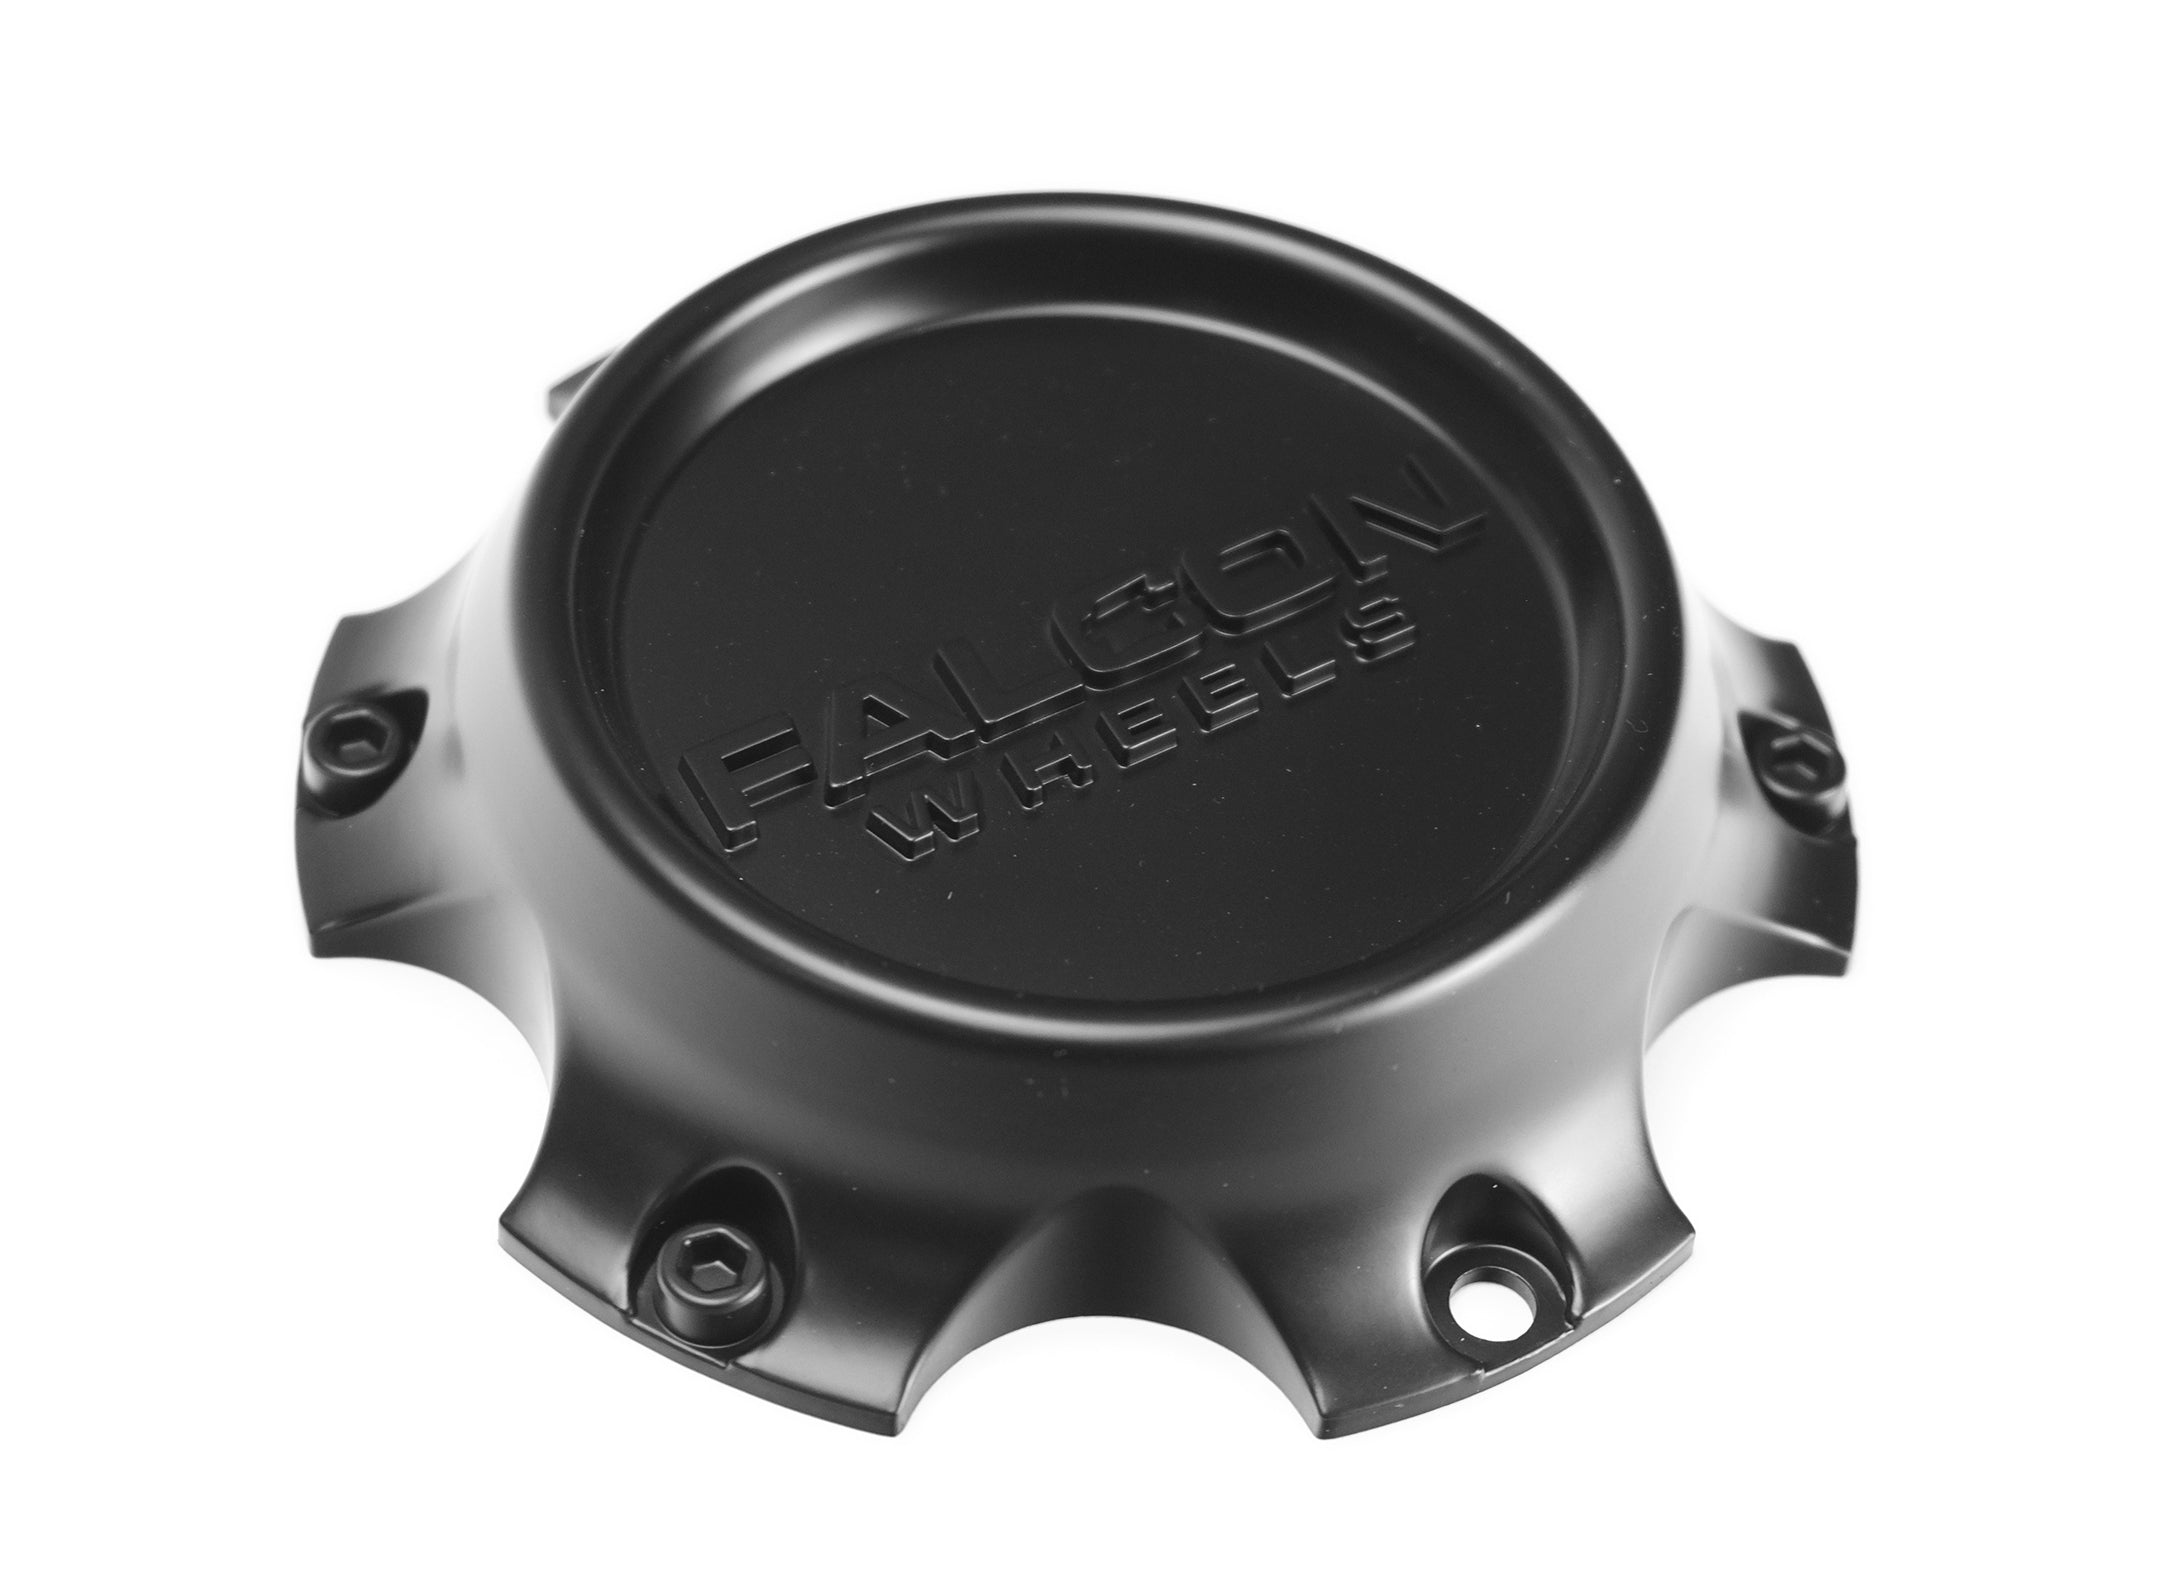 Falcon T-series Center Cap Version 2 Slim - Premium  from Falcon Off-Road Wheels - Just $28.00! Shop now at Falcon Off-Road Wheels 